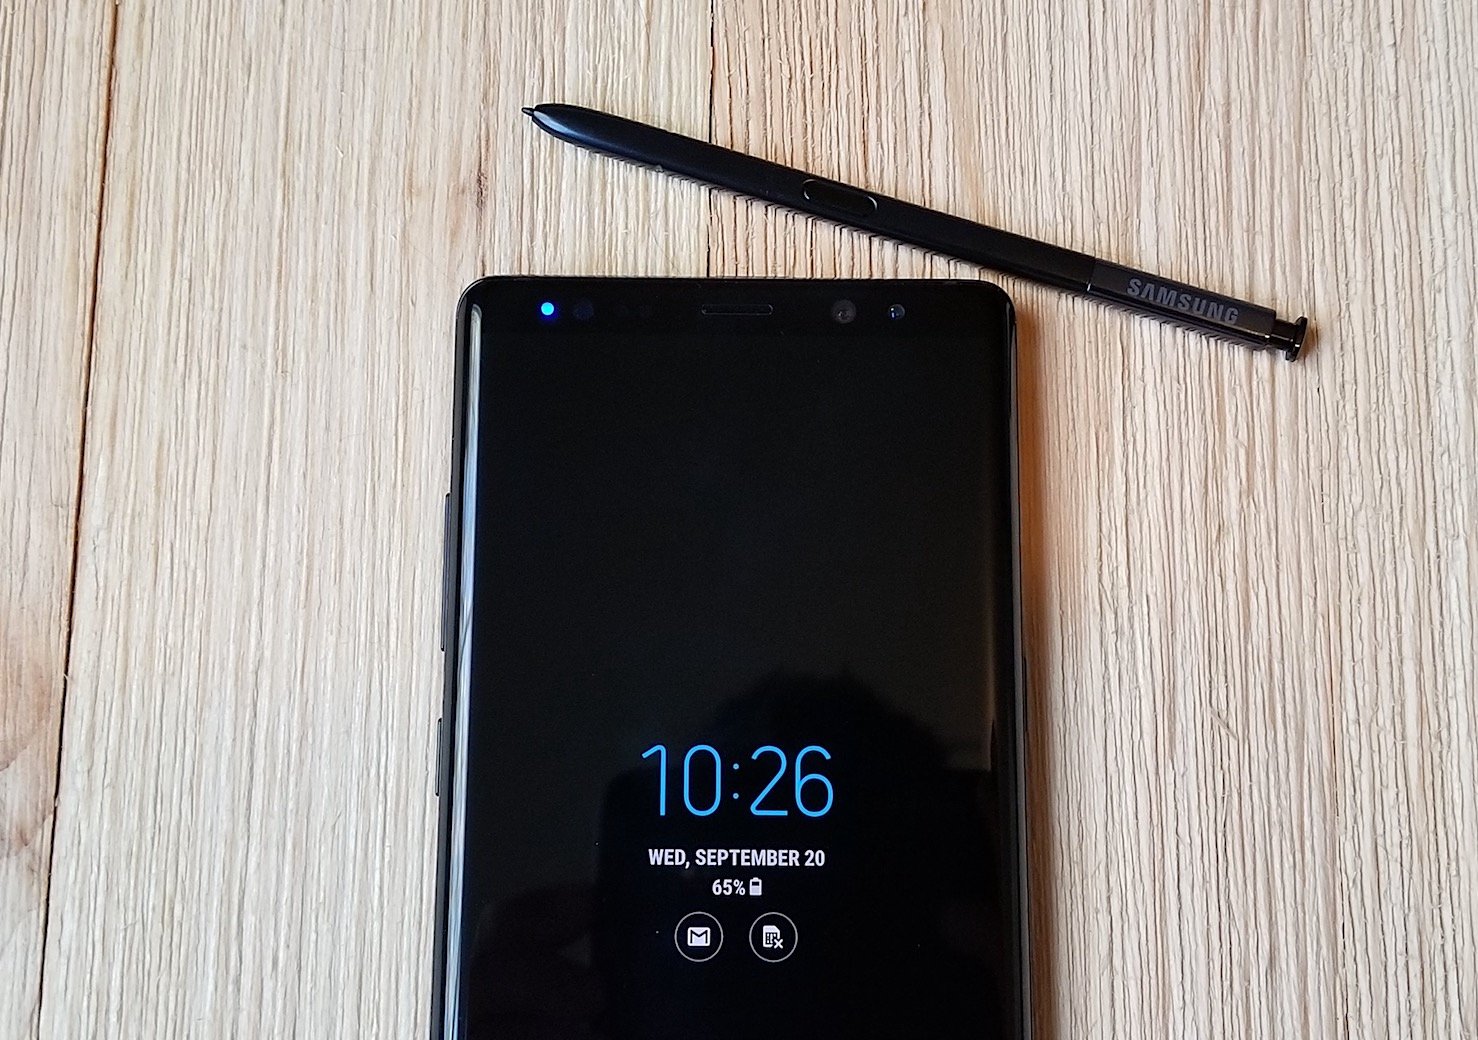 How to the Galaxy Note 8 Notification LED Light